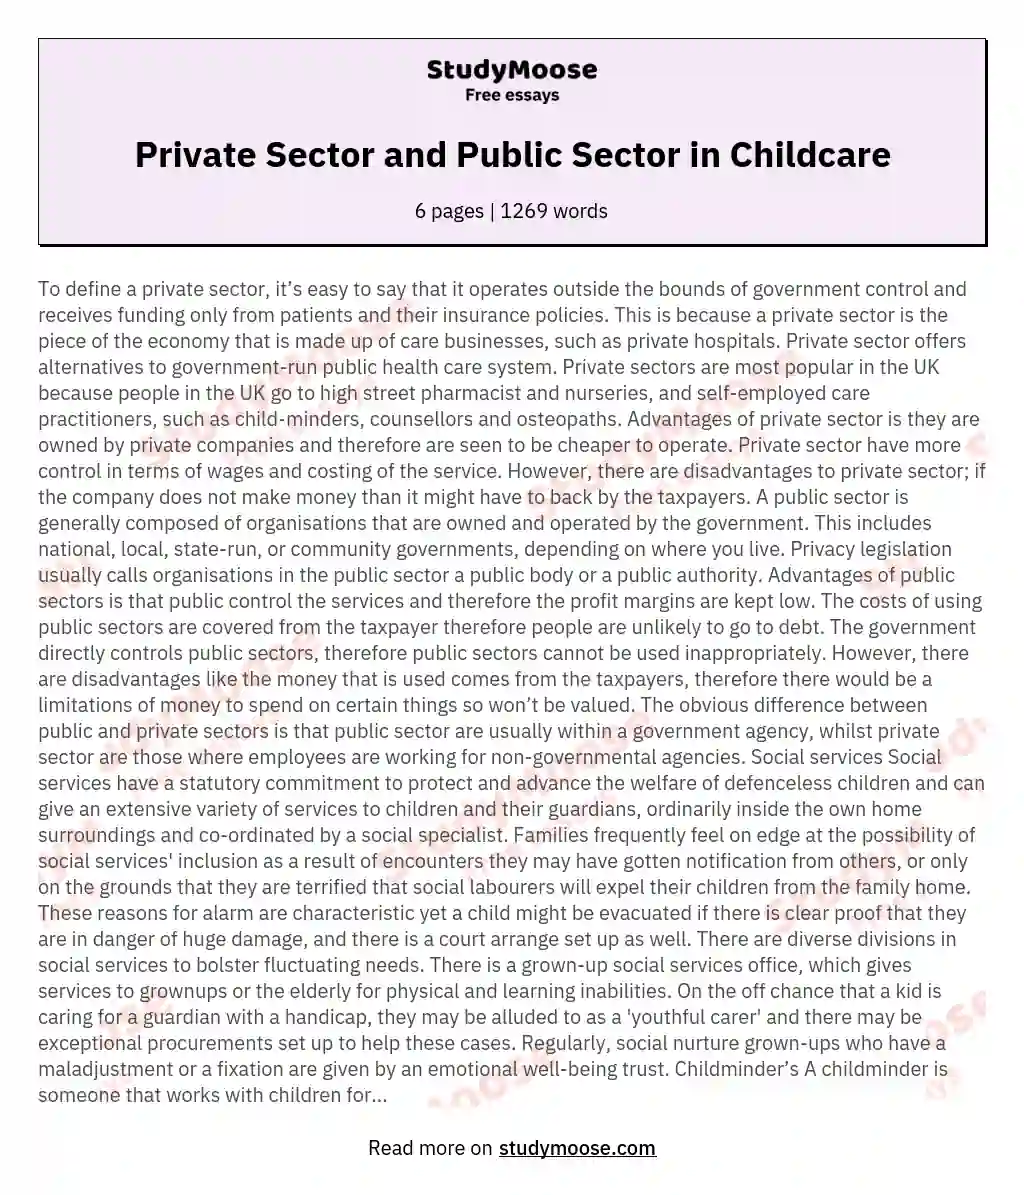 Private Sector and Public Sector in Childcare